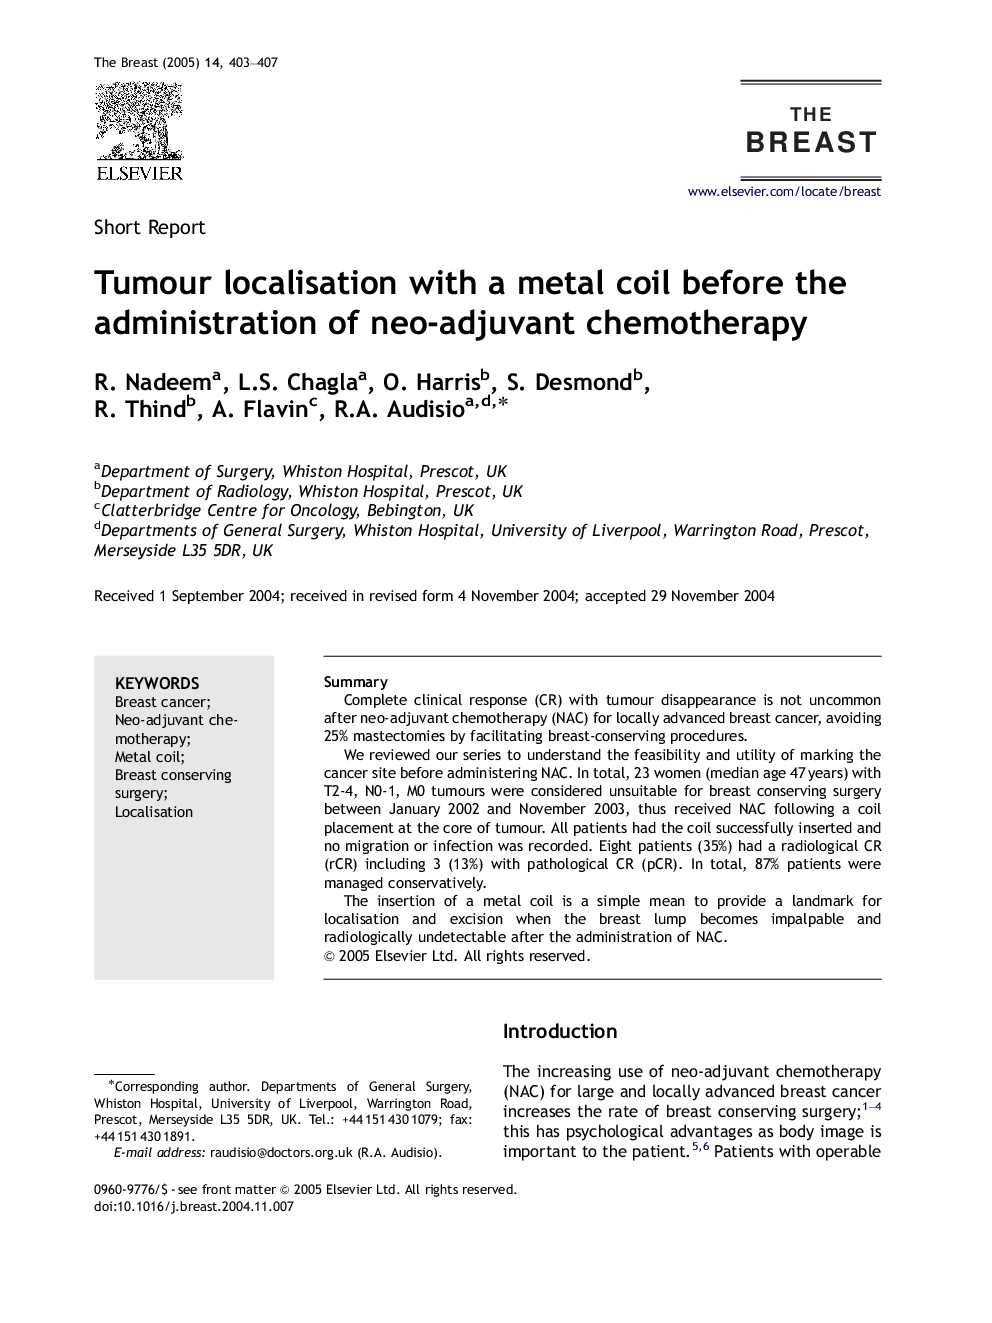 Tumour localisation with a metal coil before the administration of neo-adjuvant chemotherapy